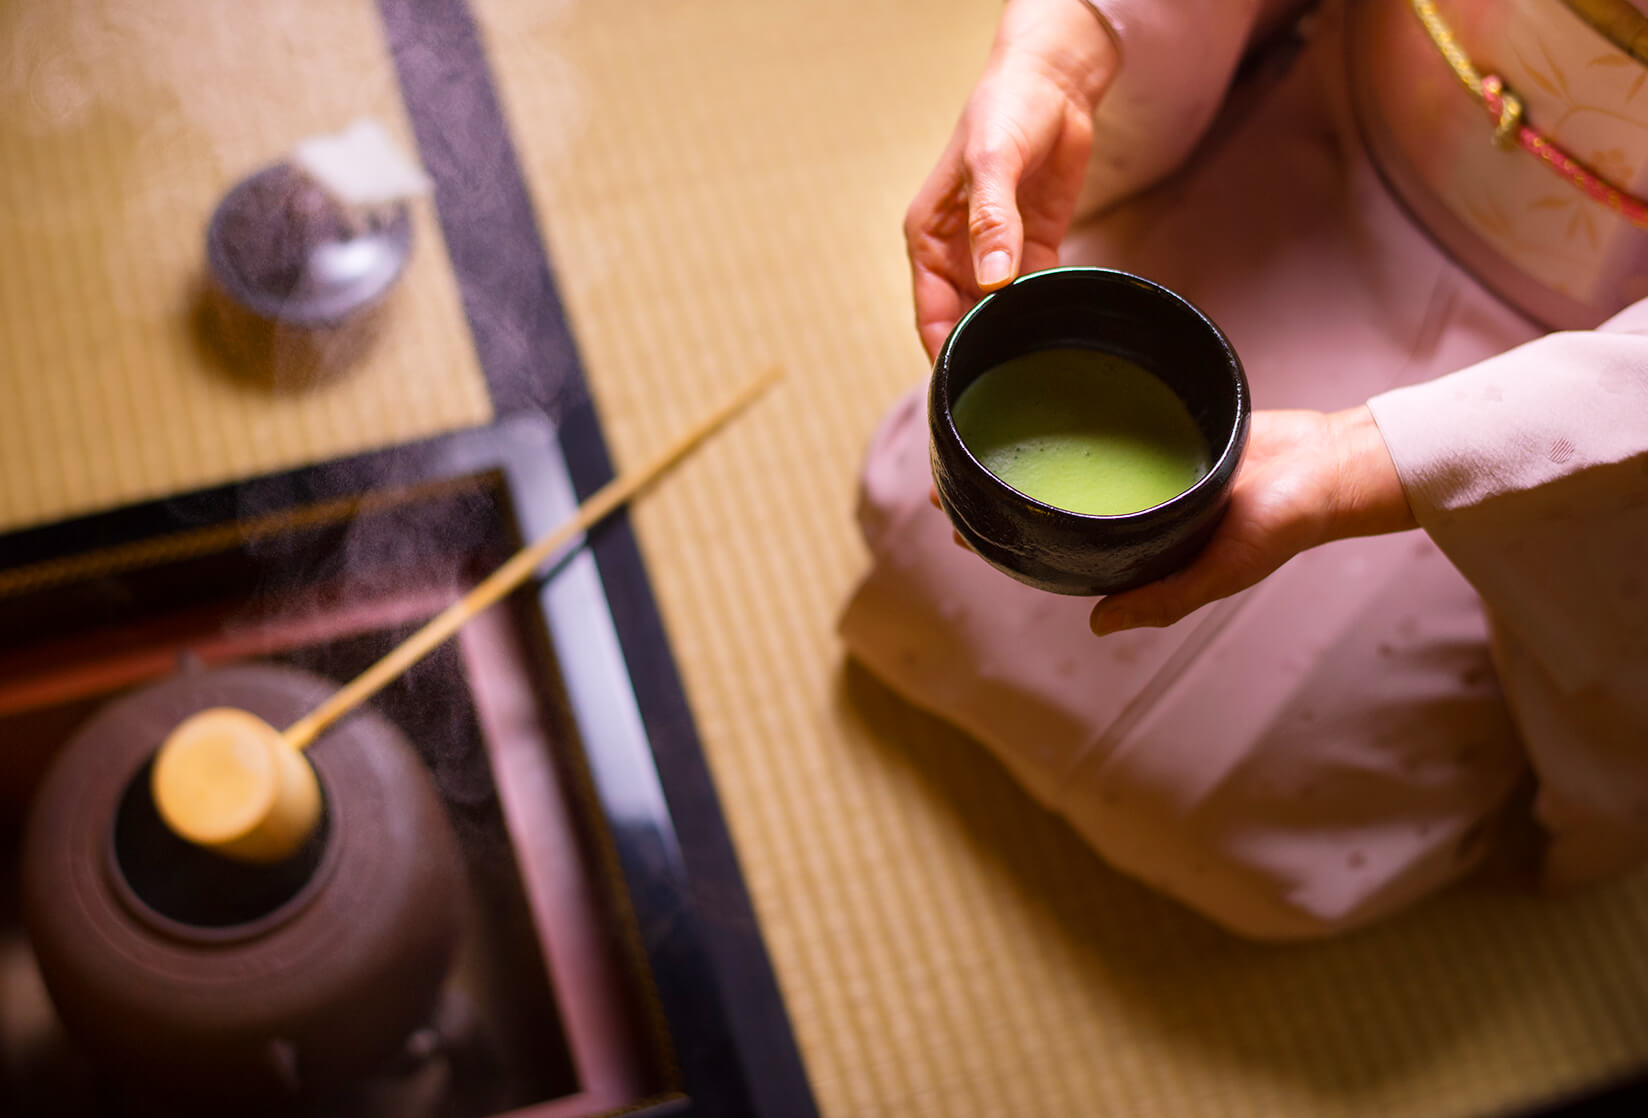 The Tradition of Traditions - The Japanese Tea Ceremony | Motto Japan Media  - Japanese Culture & Living in Japan